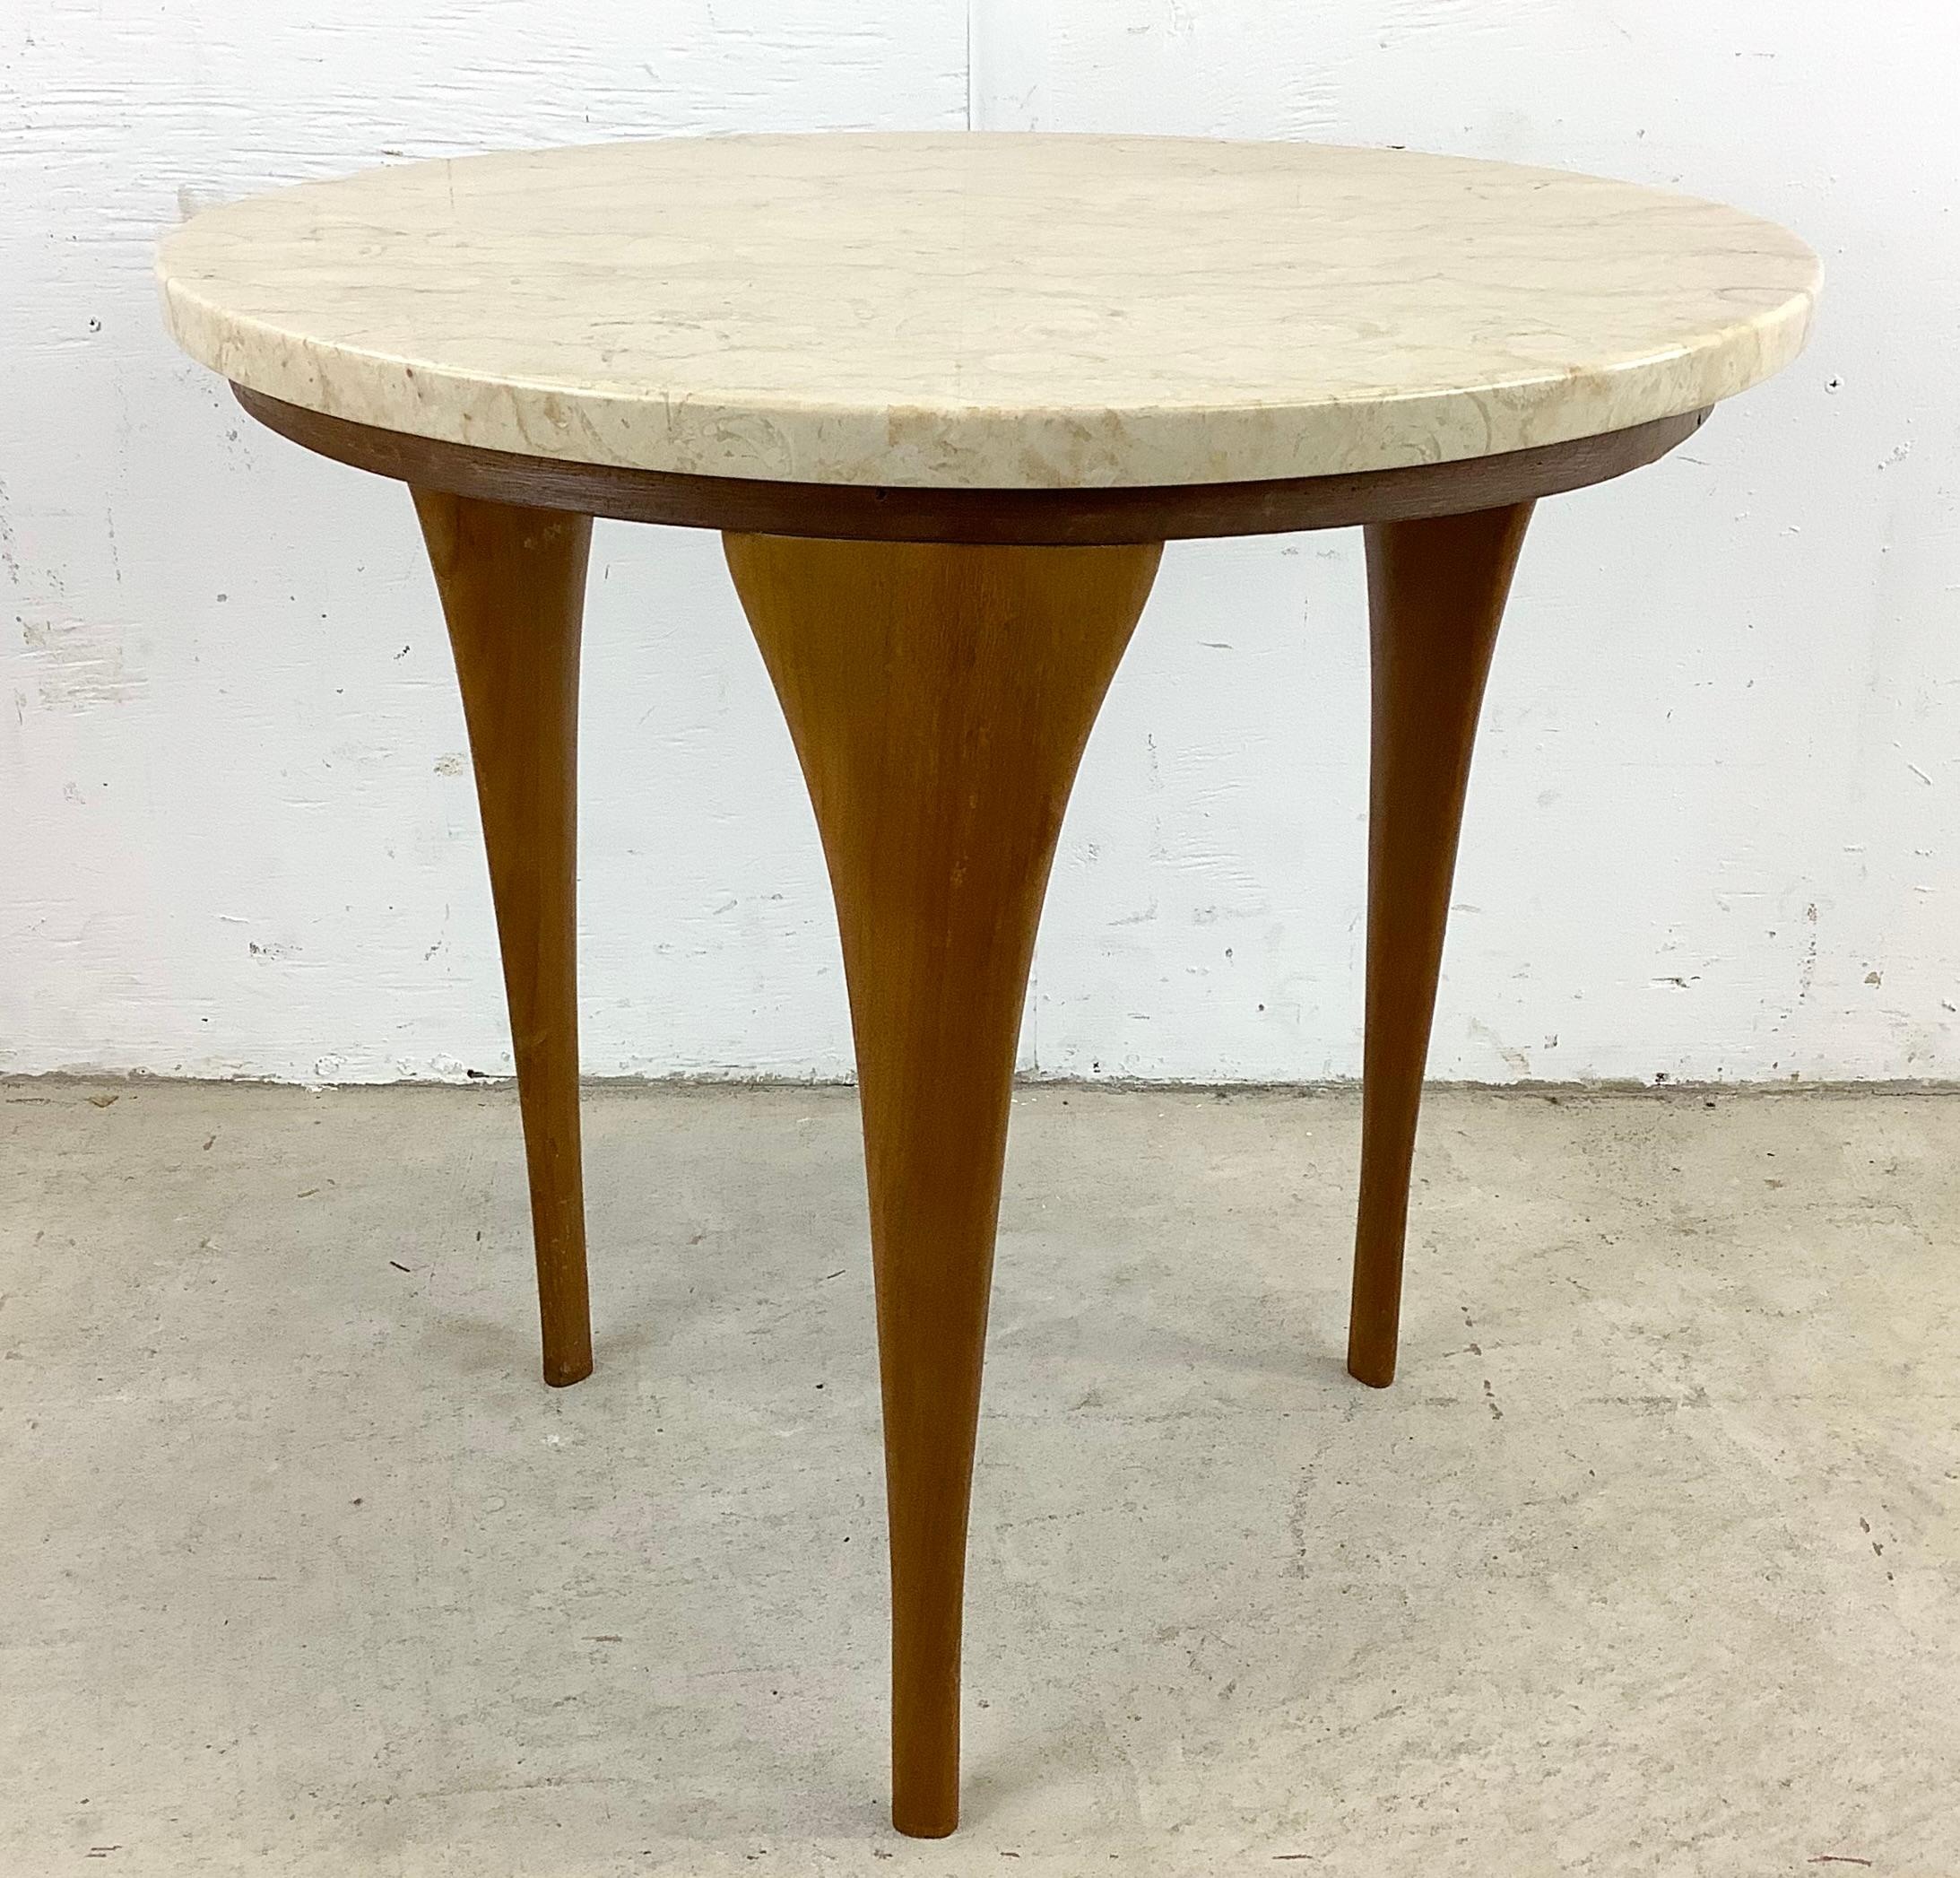 This unique midcentury oval side table features a vintage marble top, tapered sculptural wood legs, and unique Italian modern design. The simple yet styllish design of this elegant mcm end table makes this the perfect addition to any interior in